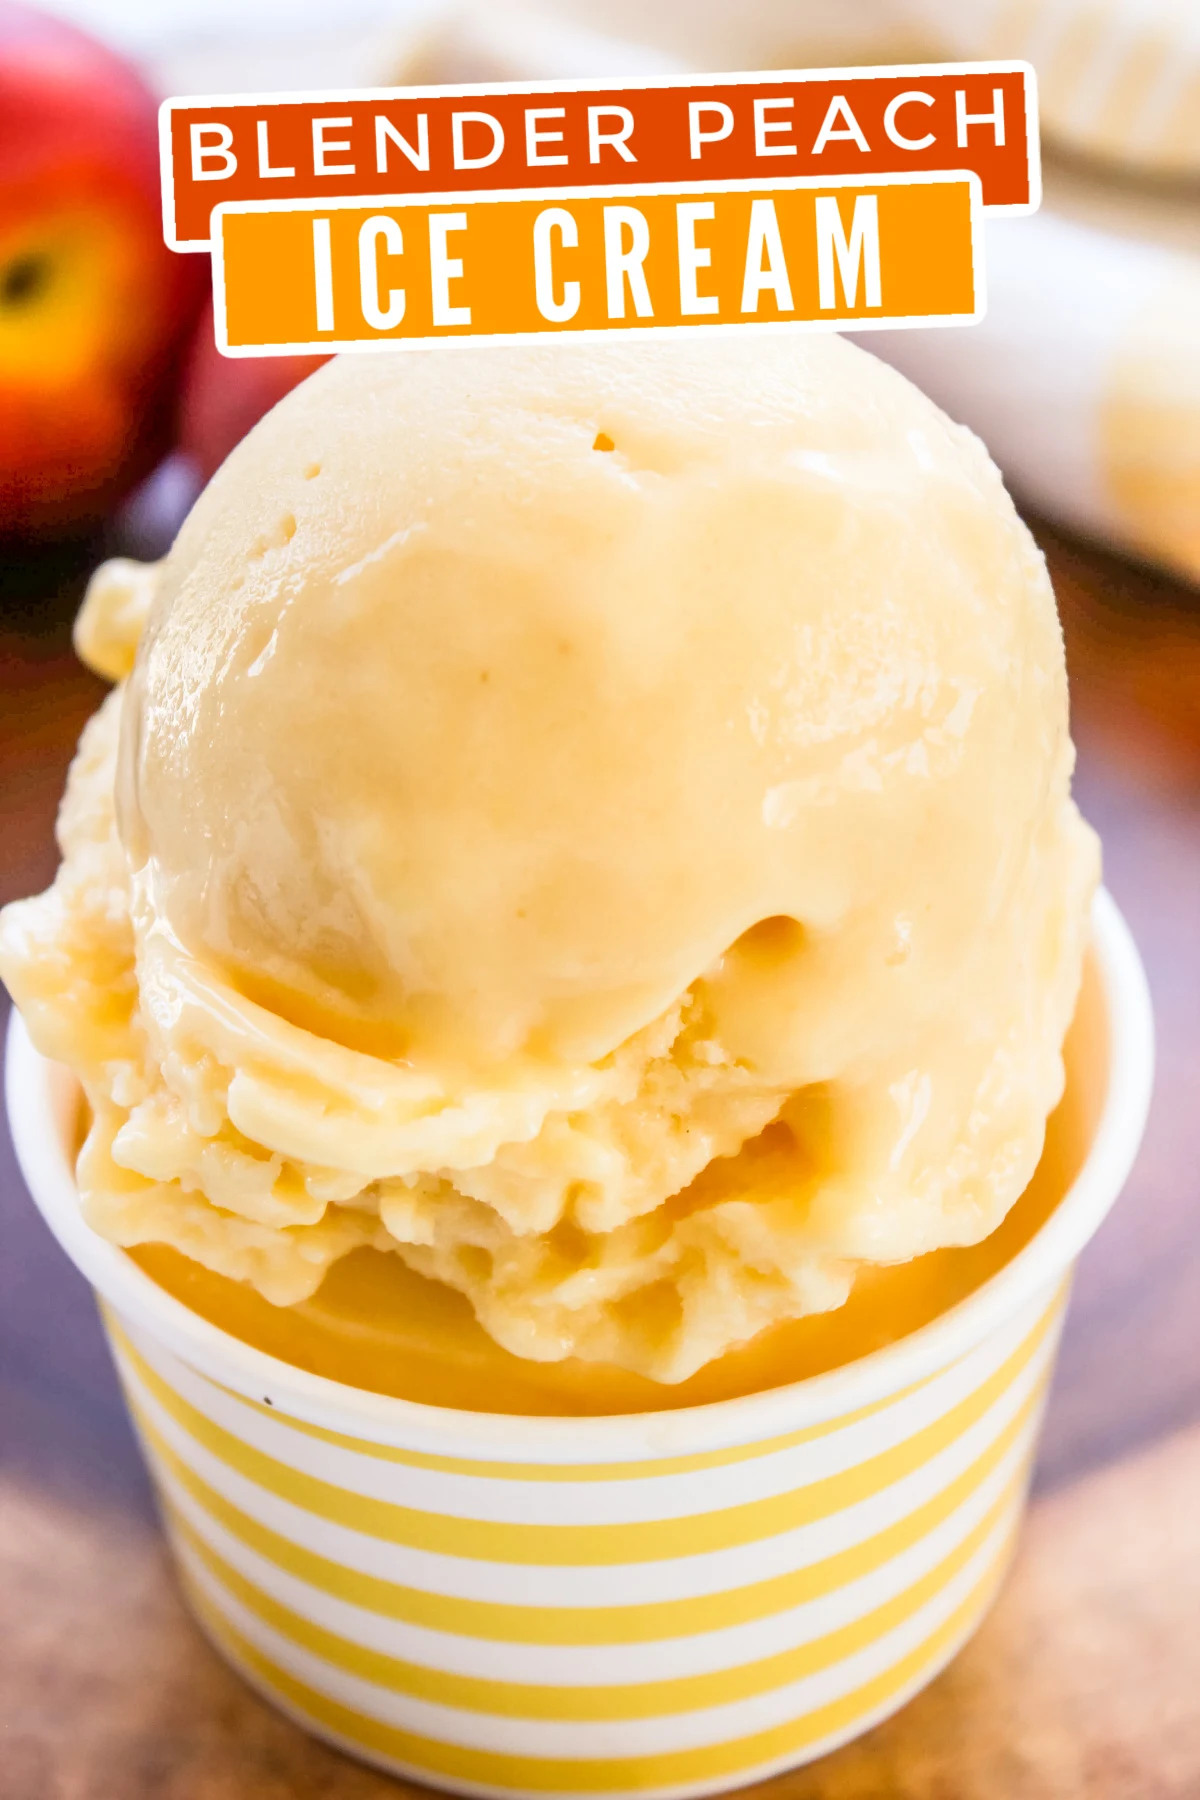 Just 3 simple ingredients and you can freeze up the taste of sunshine with this super easy blender Peach Ice Cream recipe!